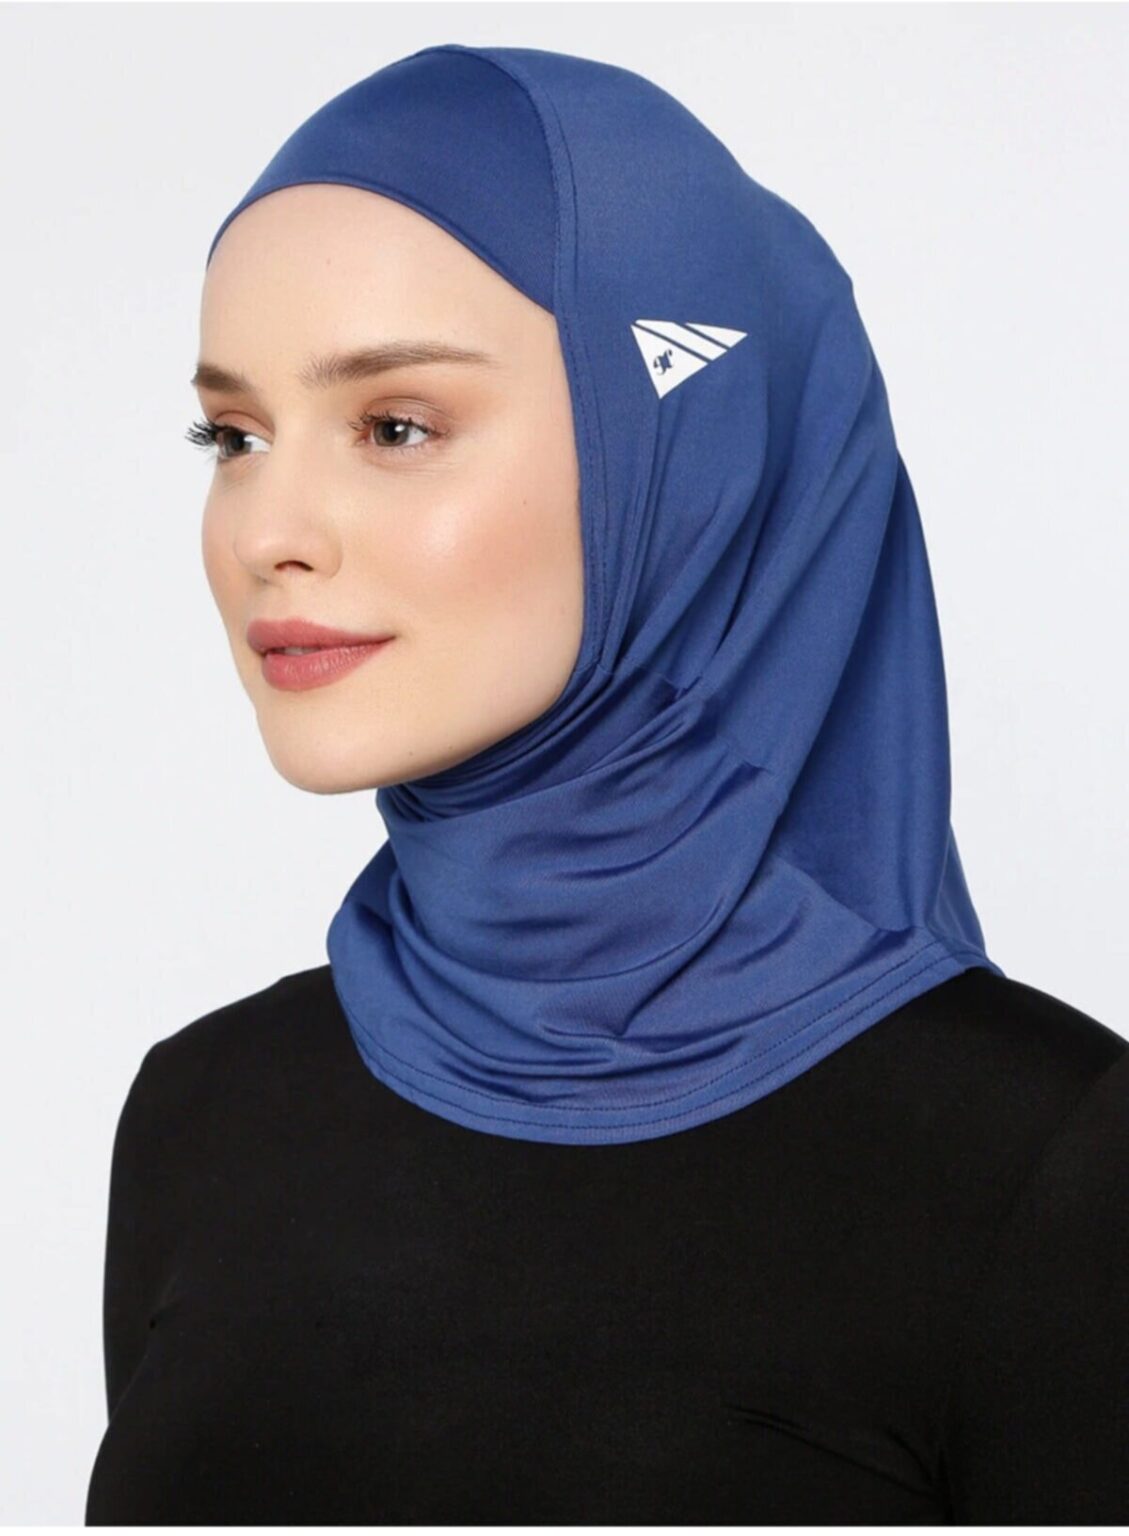 All Types Of Jersey Hijabs - Instant & Smart Use - Hijab Fashion ...